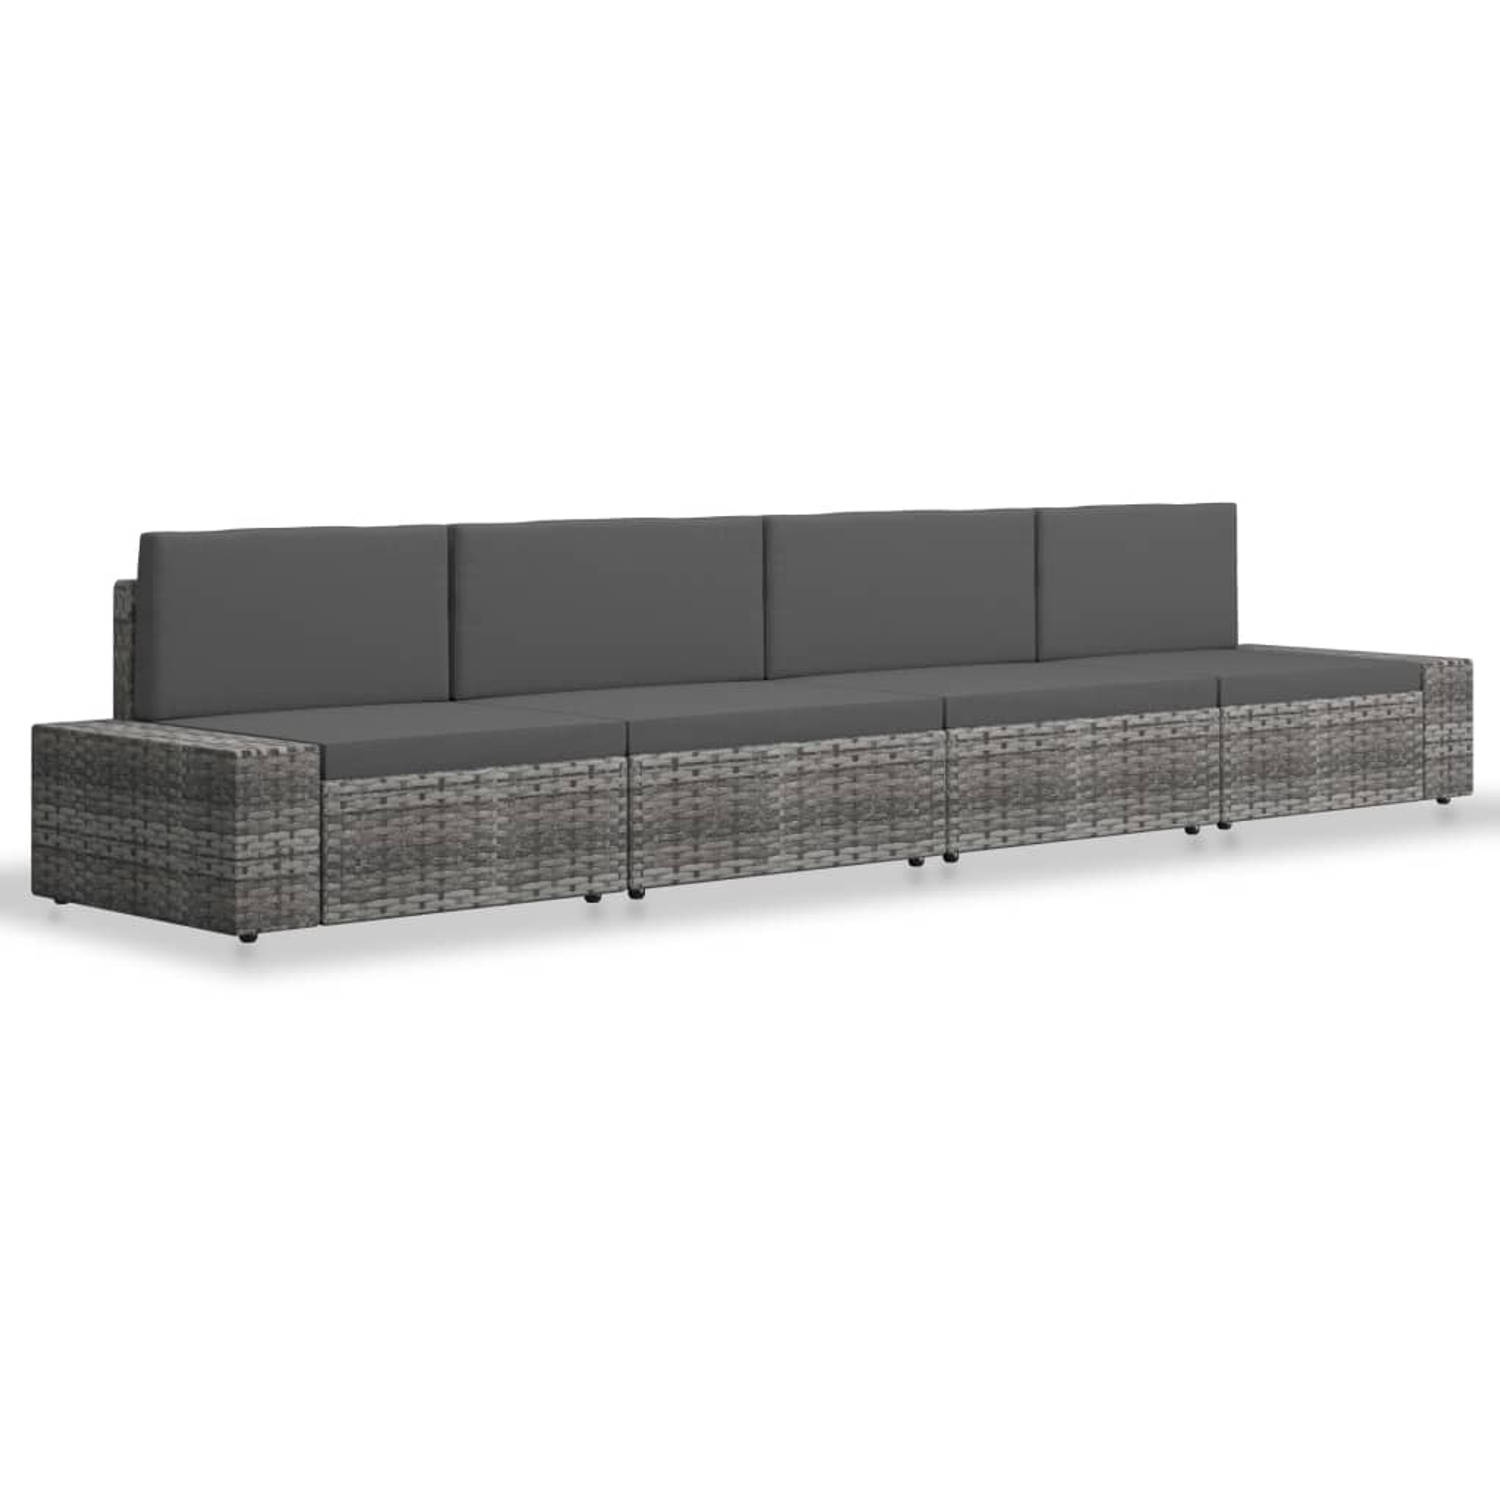 The Living Store 4-delige Loungeset poly rattan grijs - Tuinset